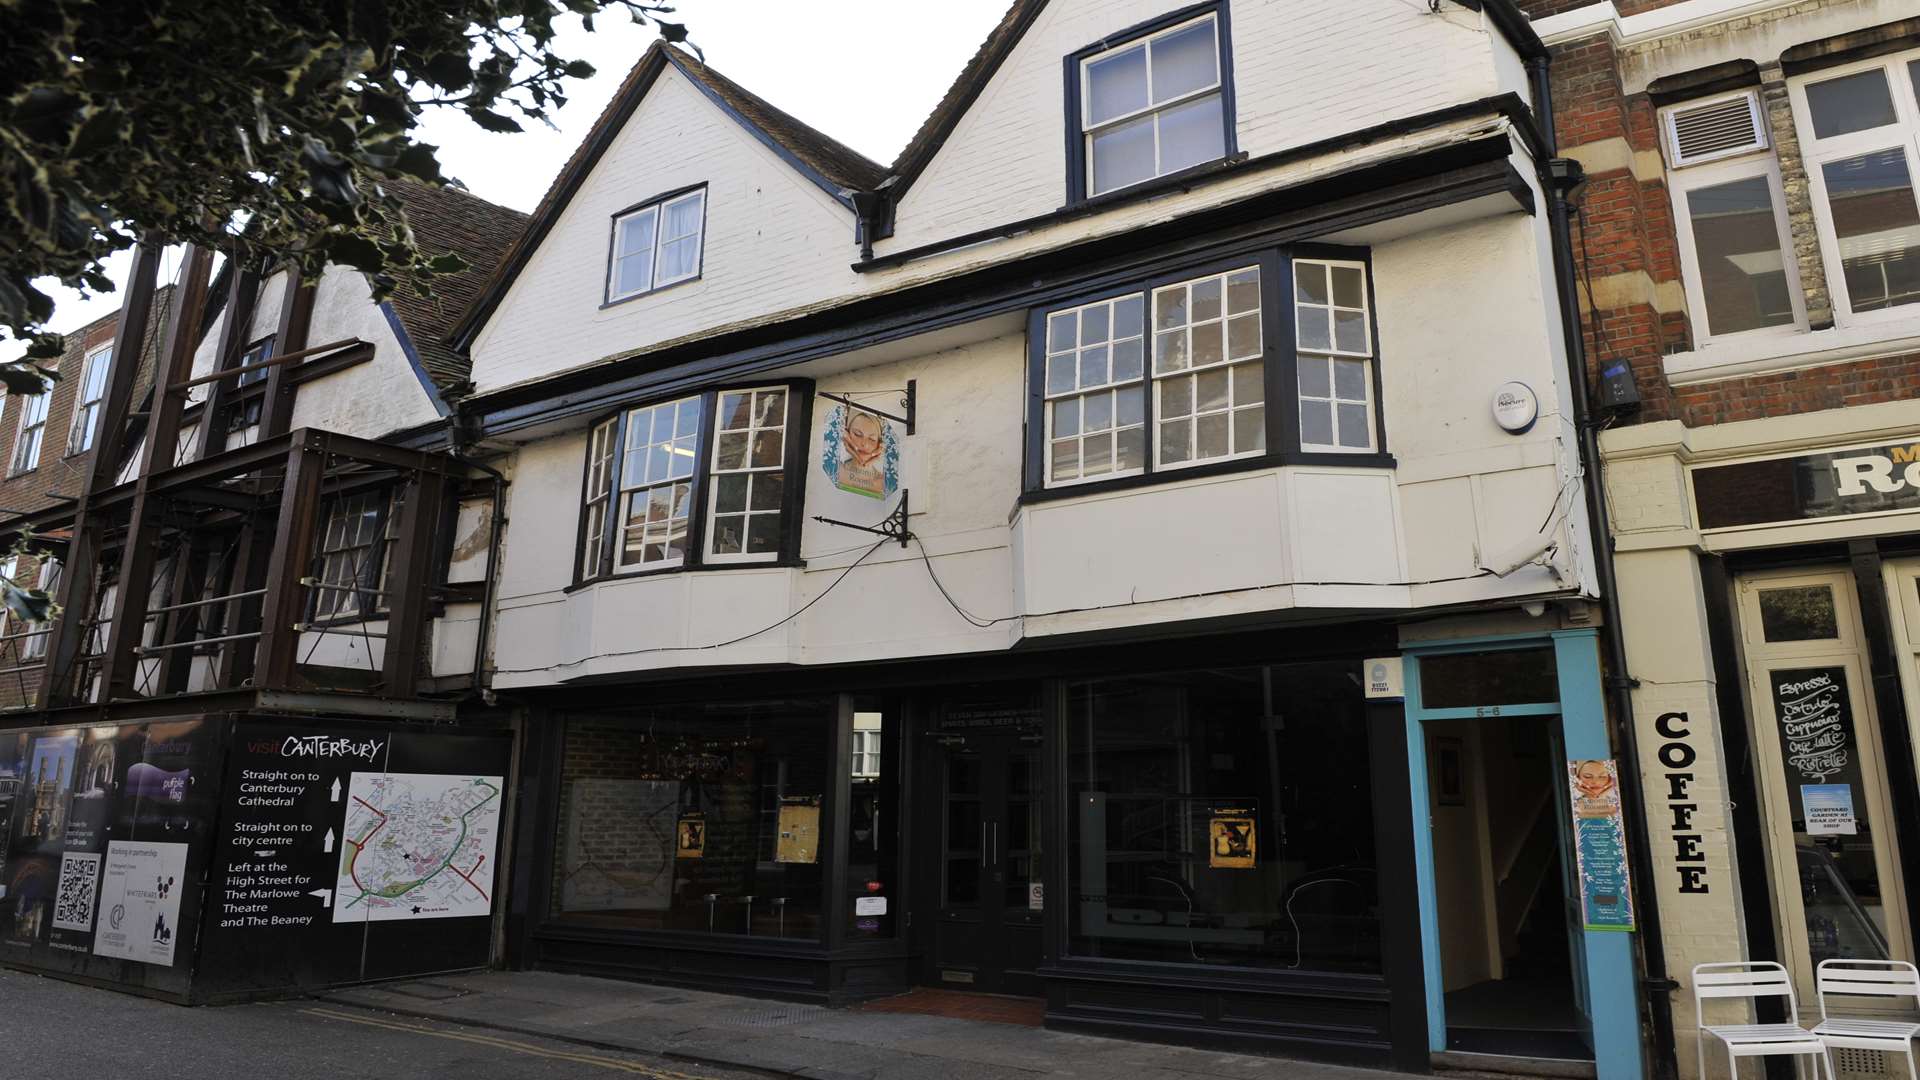 The Loft in Canterbury, where Paul Clubb attacked bouncer Alastair Valentino